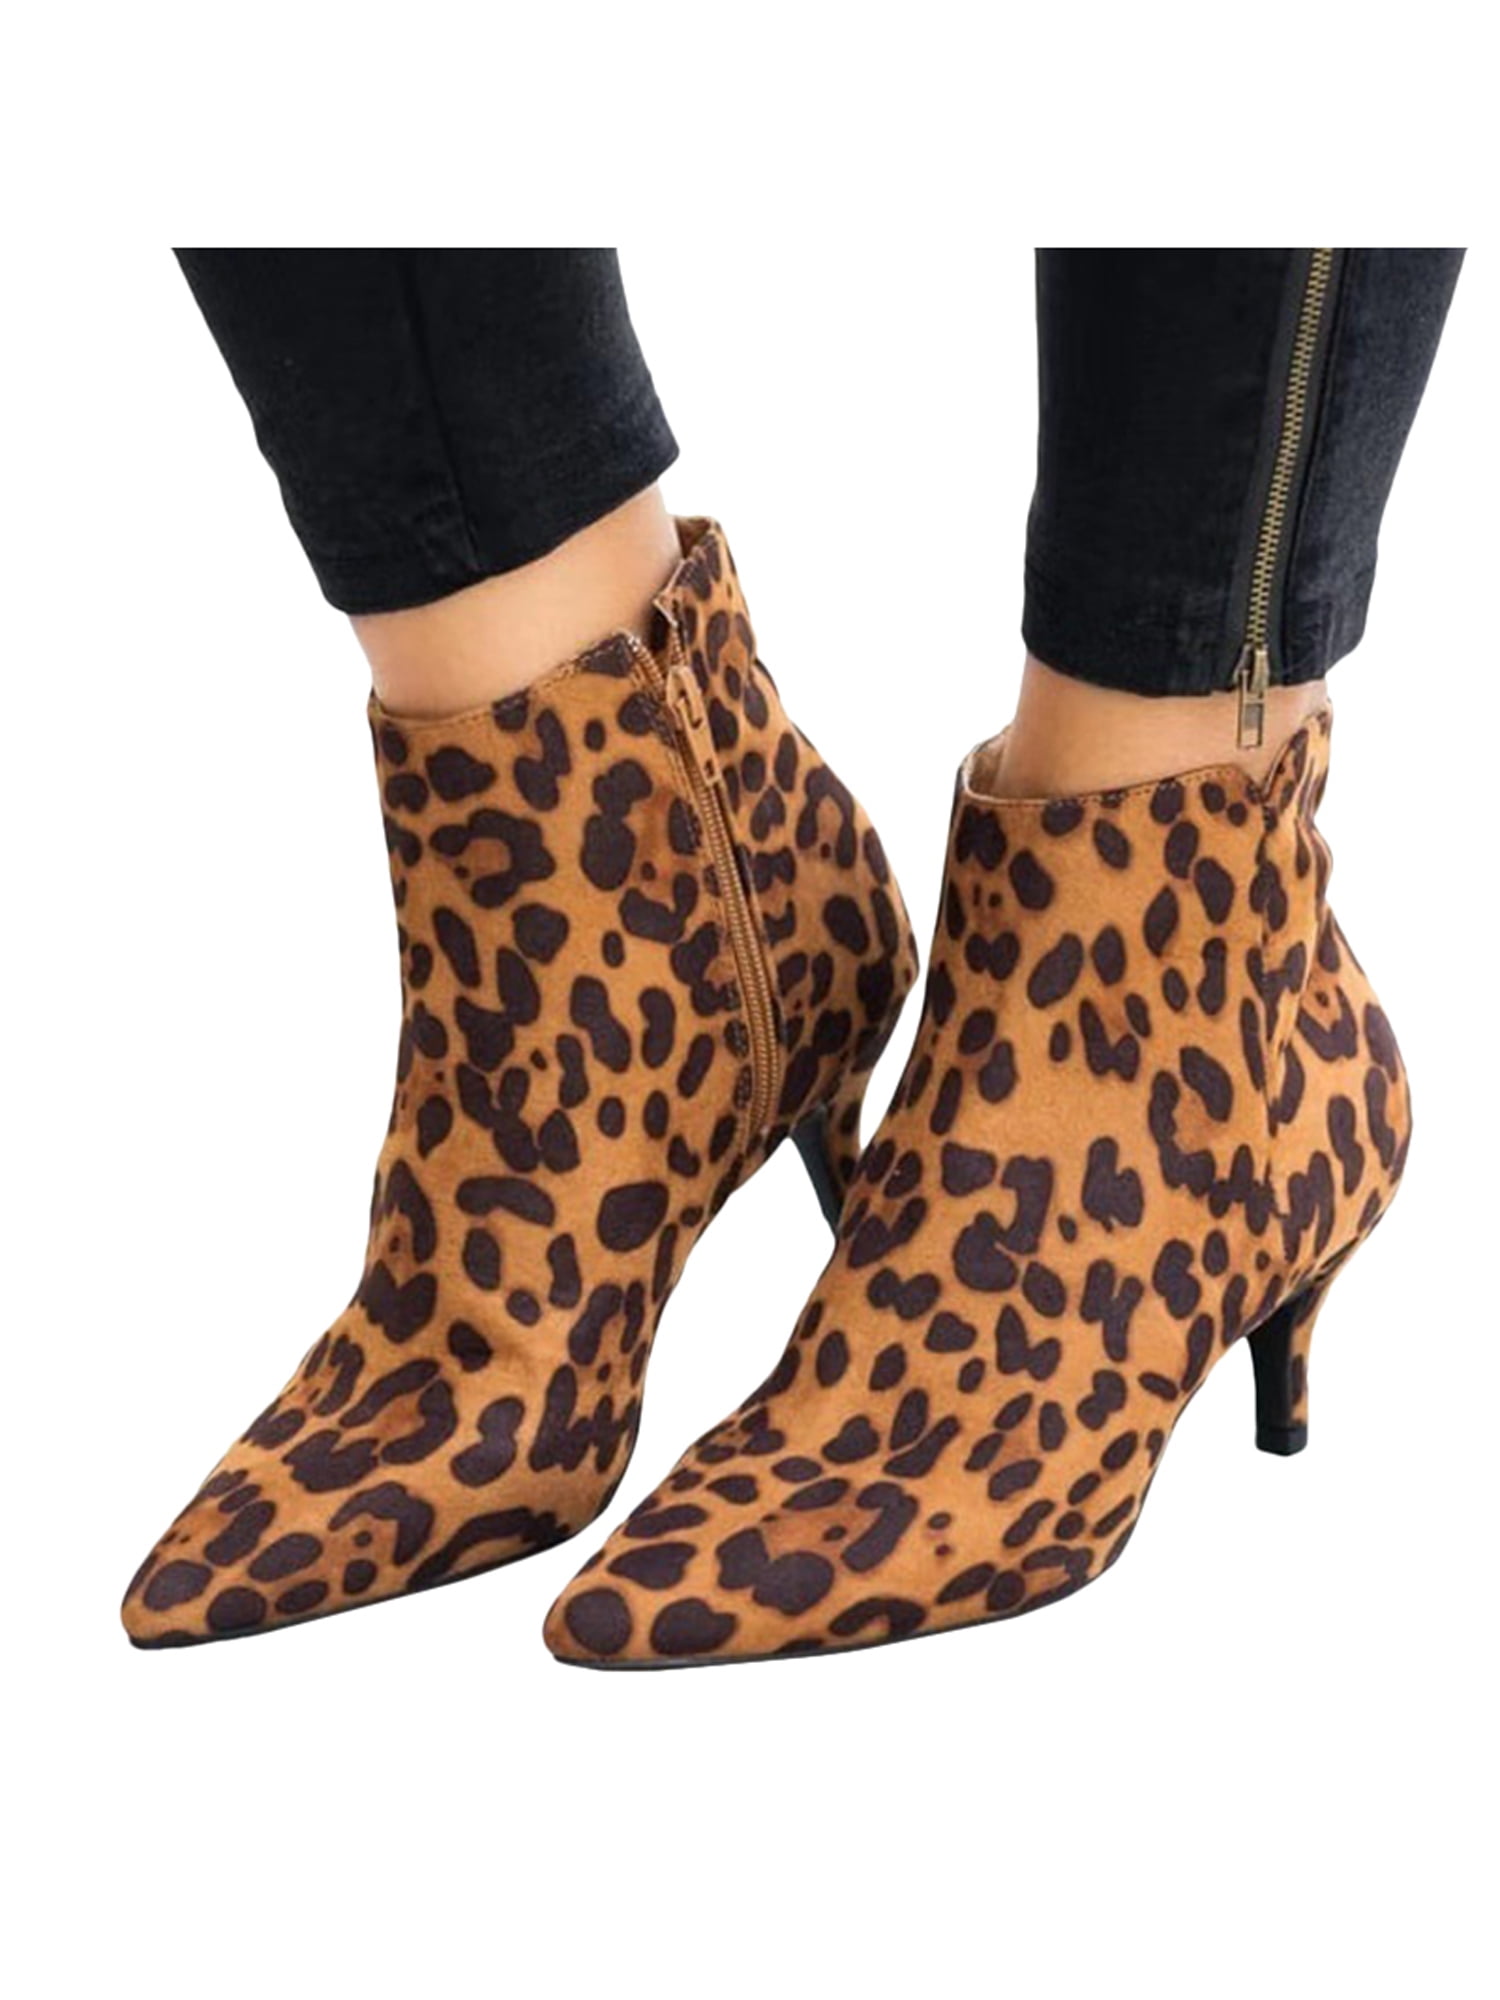 Womens Mid Kitten Heels Ankle Boots Ladies Zipper Pointy Toe Booties Party Shoes 